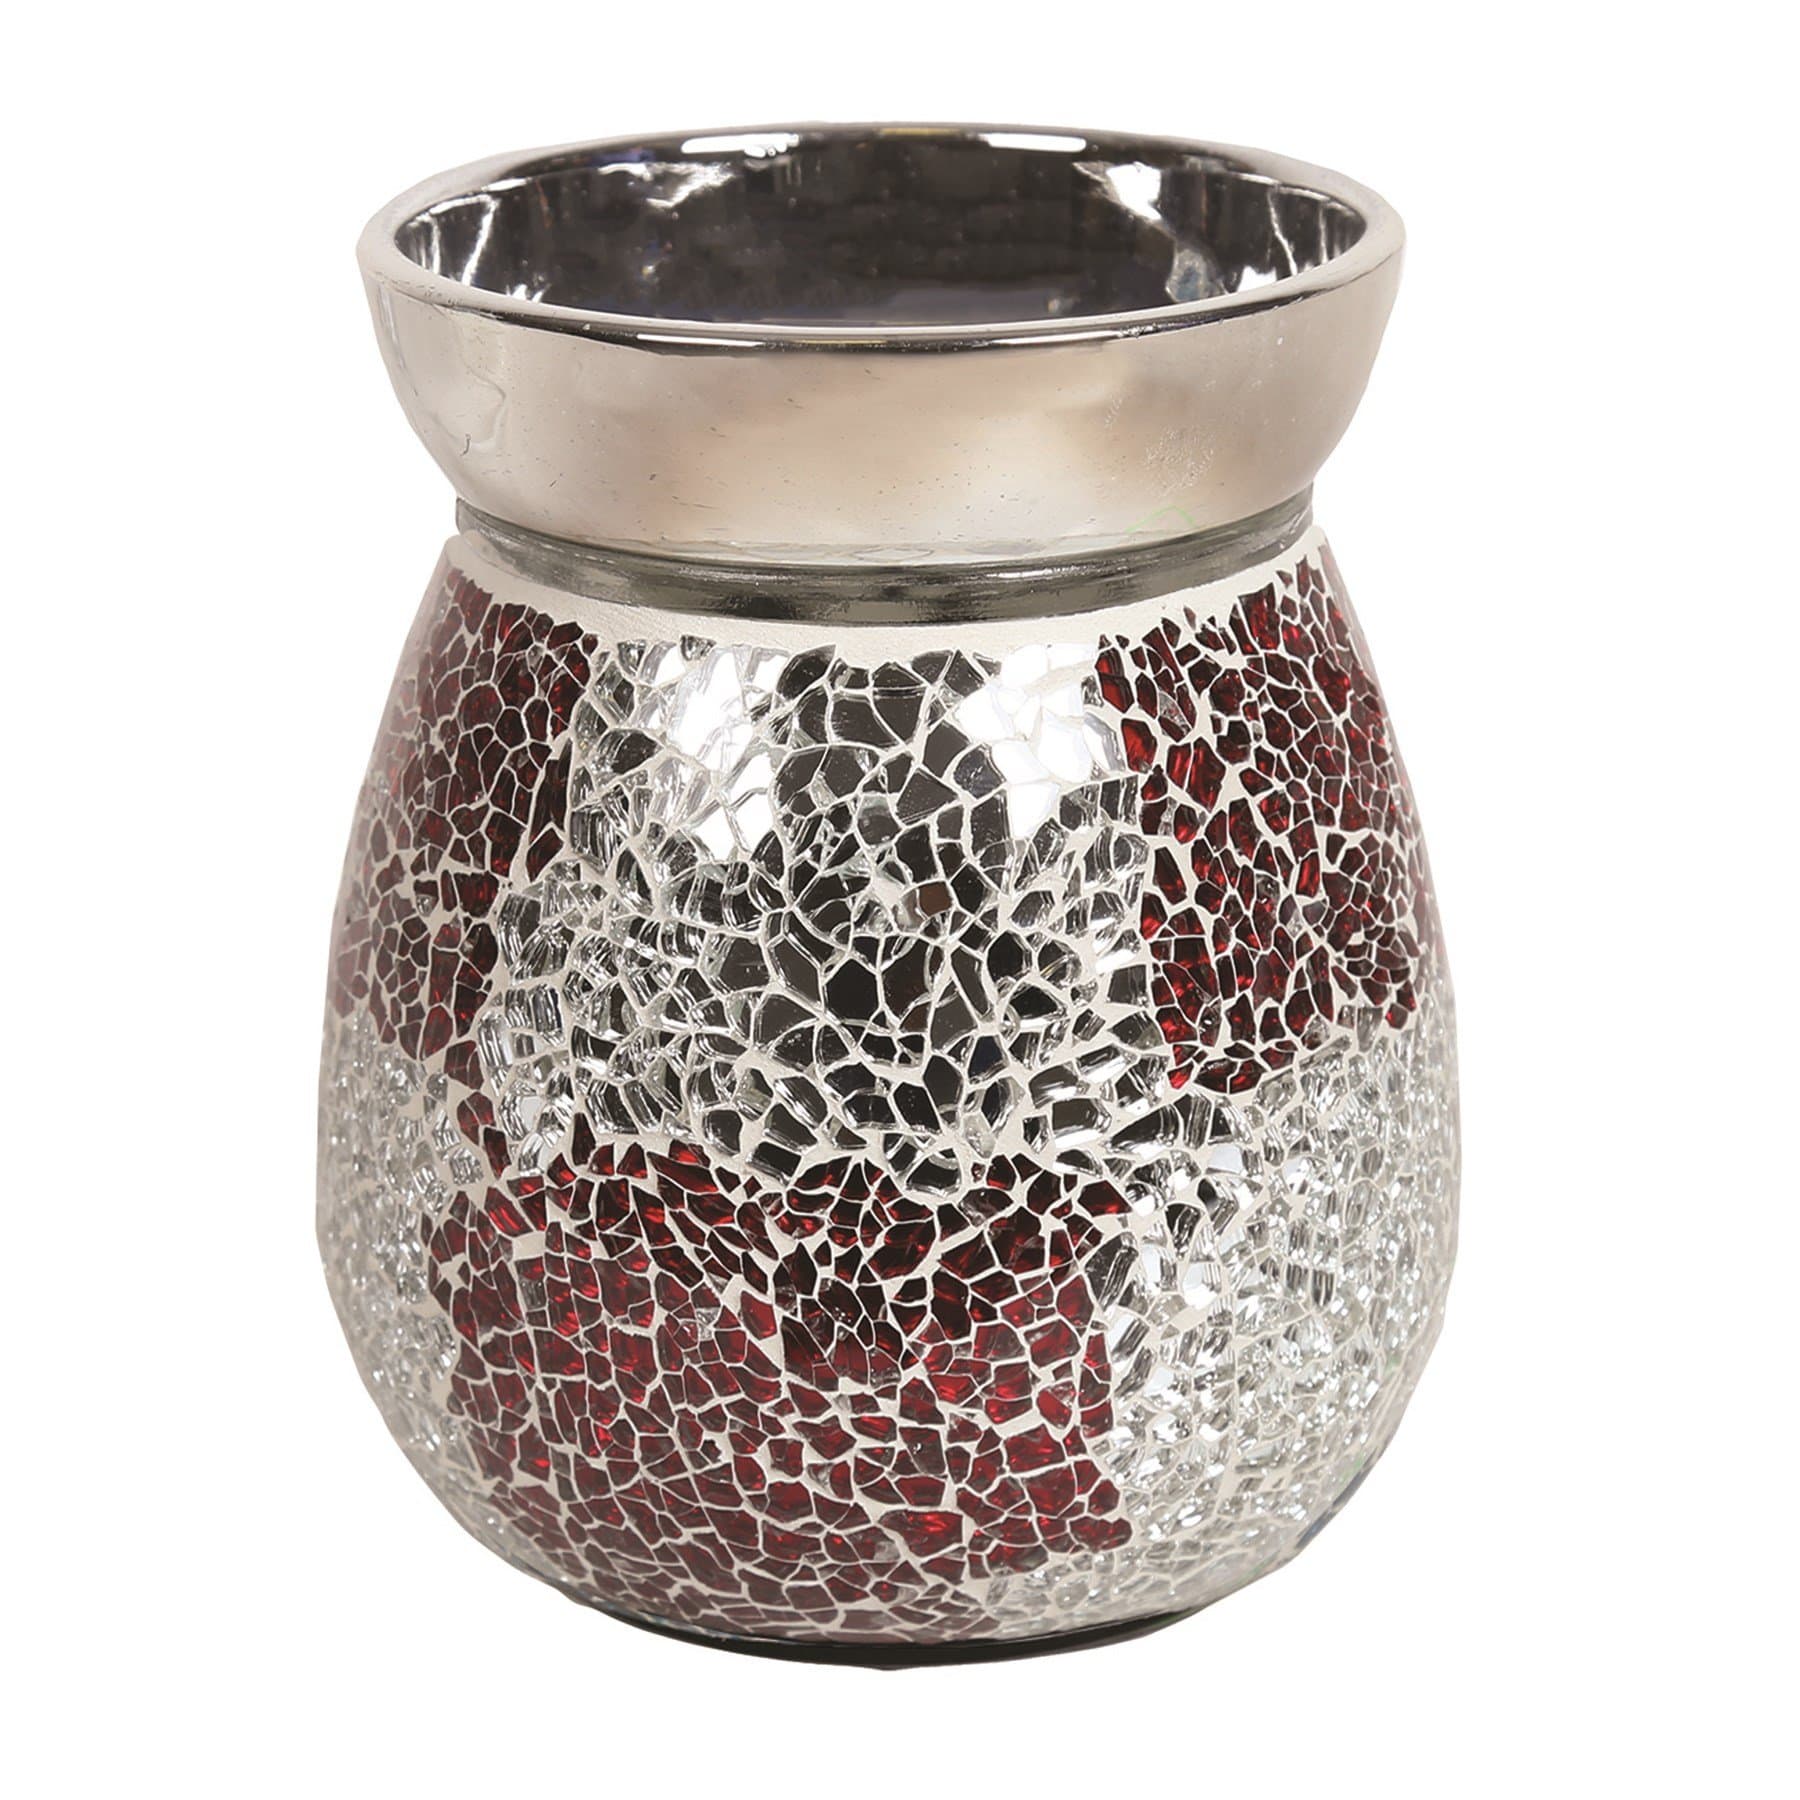 Aroma Accessories Electric Melt Warmer Electric Wax Melt Burner - Red & Silver Crackle